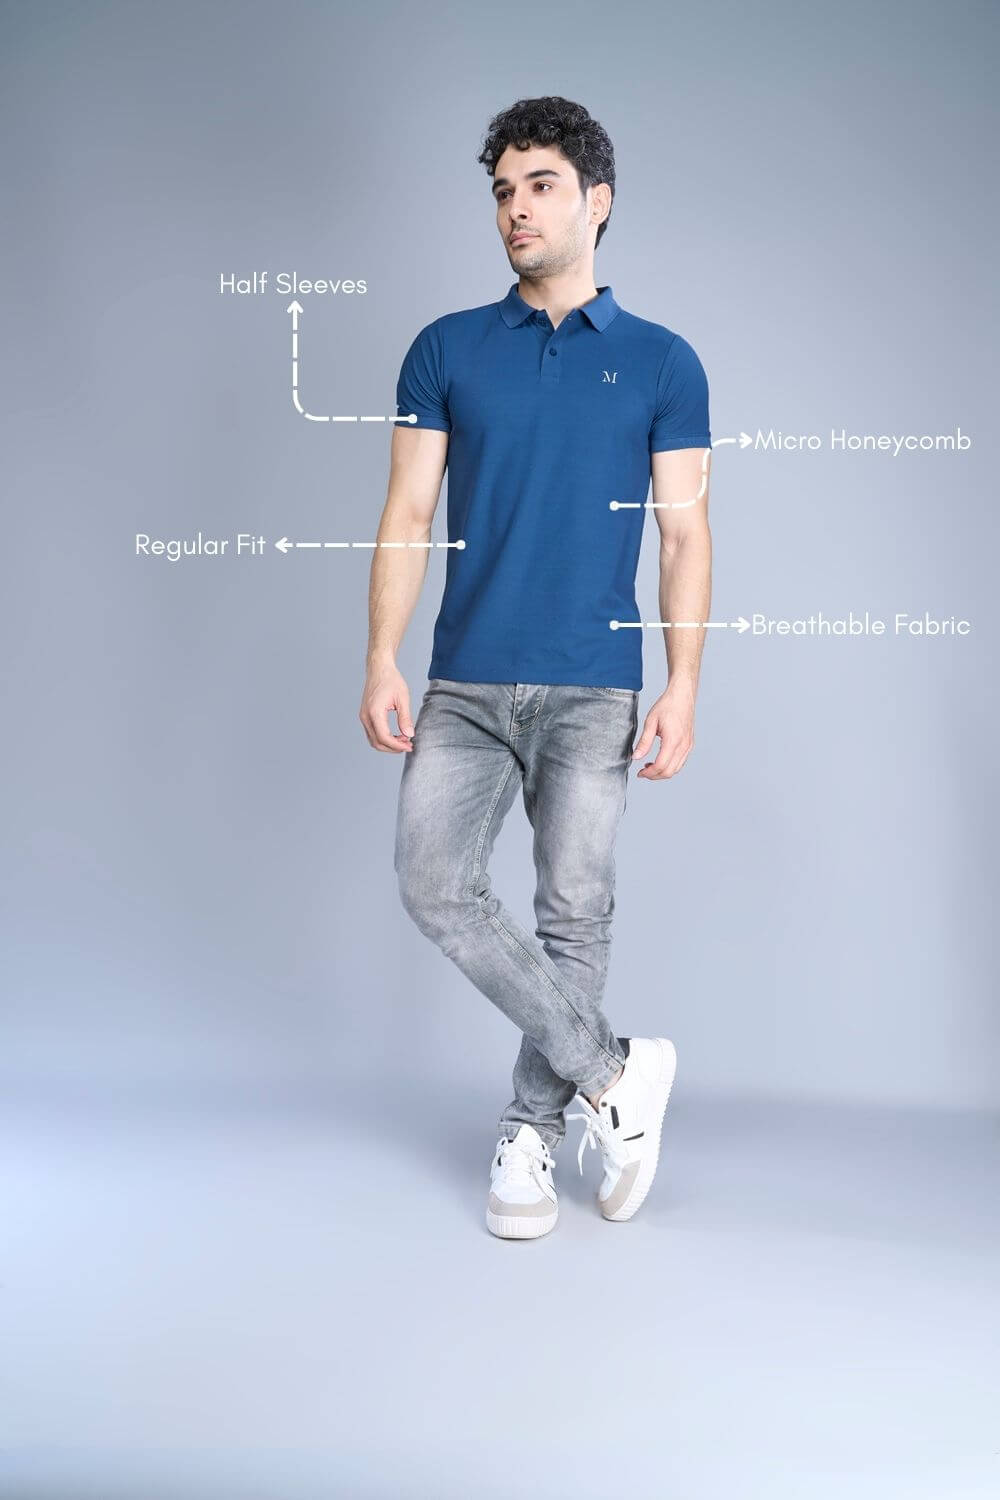 Teal Navy colored, Smart Tech Polo T-shirts for men with collar and half sleeves, product feature.